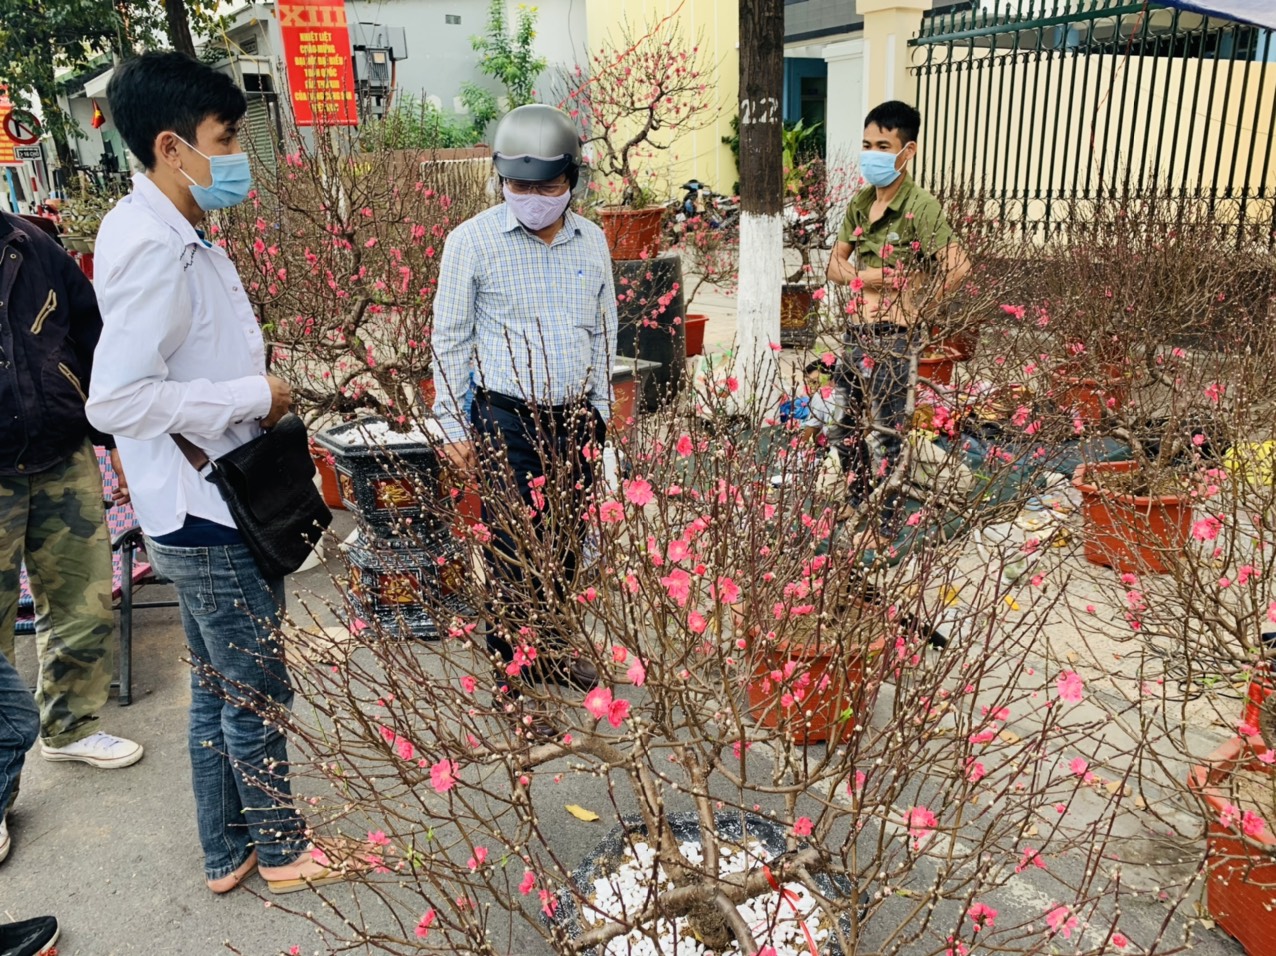 People shopping for Tet flowers